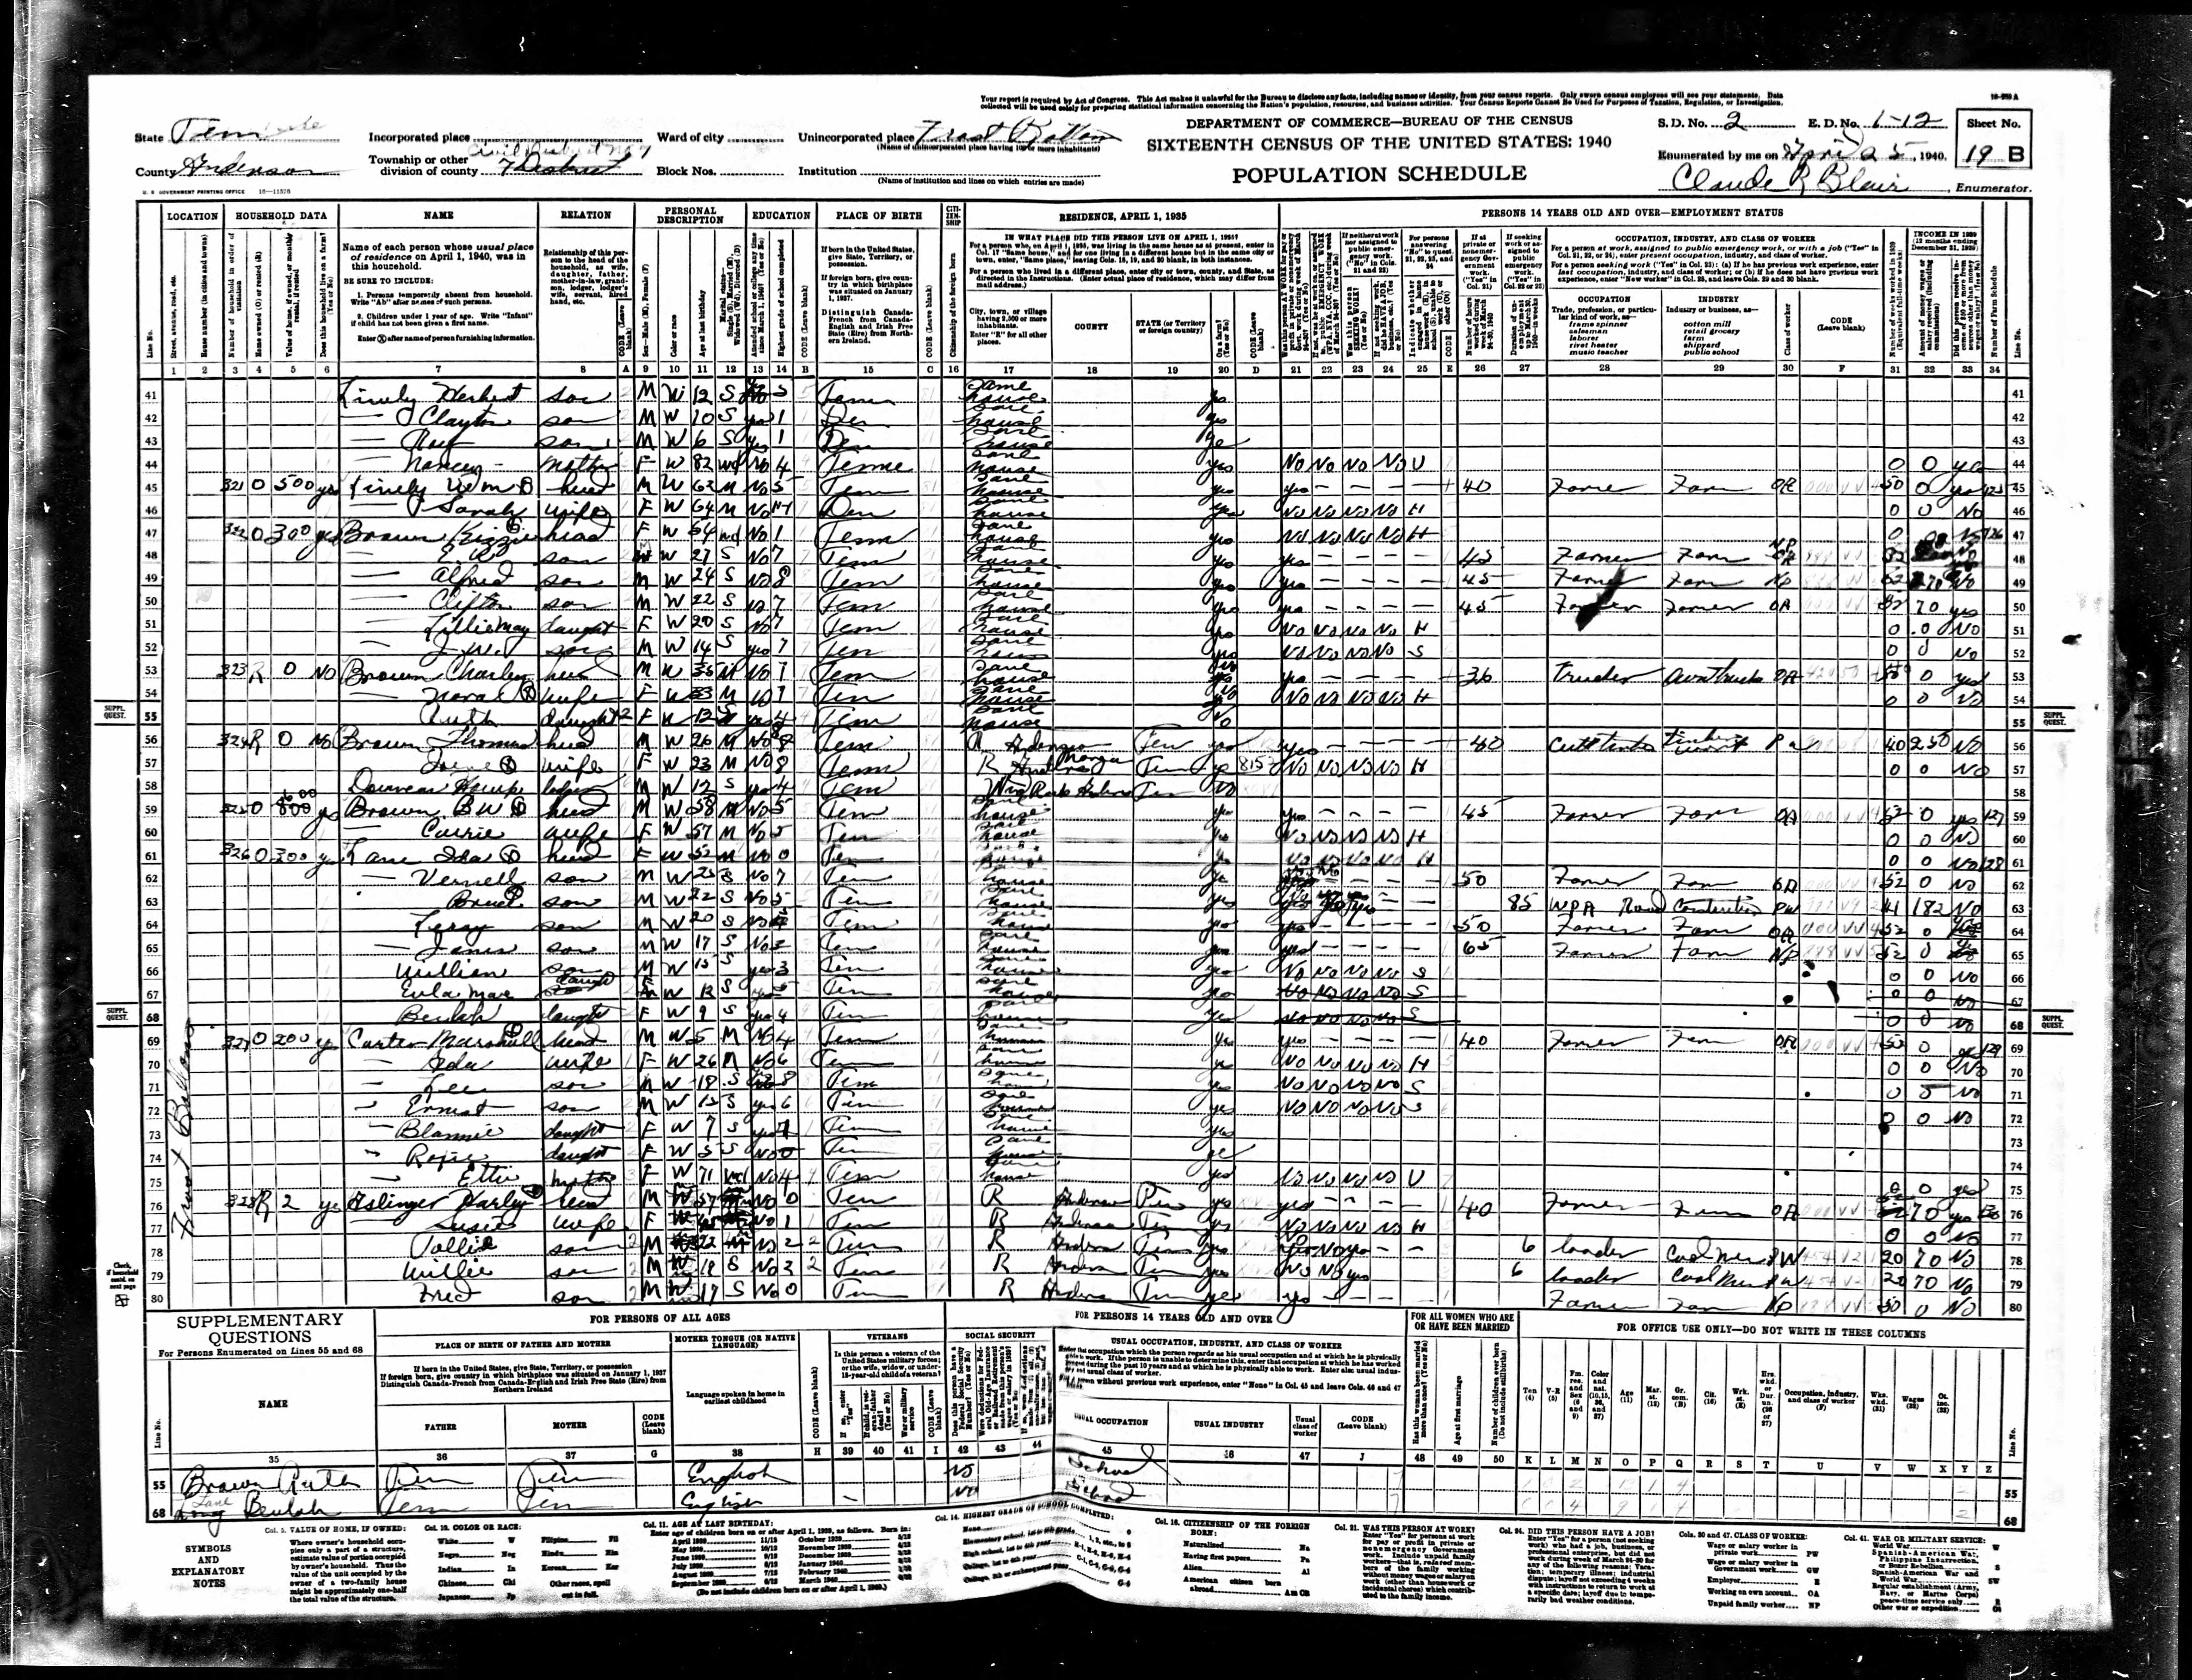 1940 U.S. Census, Anderson County, Tennessee, Dist. 7, page 215b